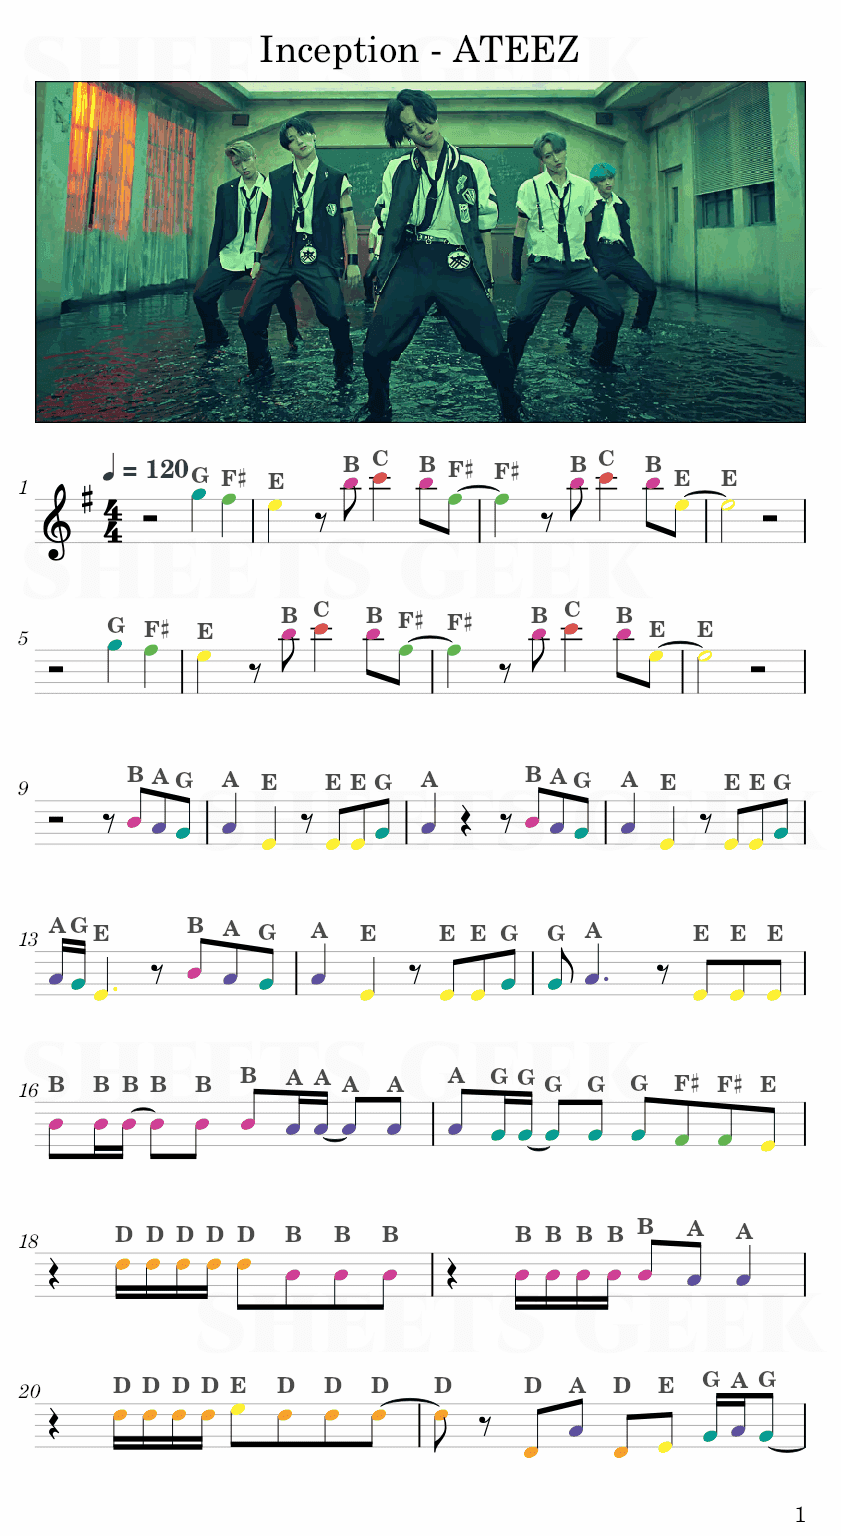 Inception - ATEEZ Easy Sheet Music Free for piano, keyboard, flute, violin, sax, cello page 1